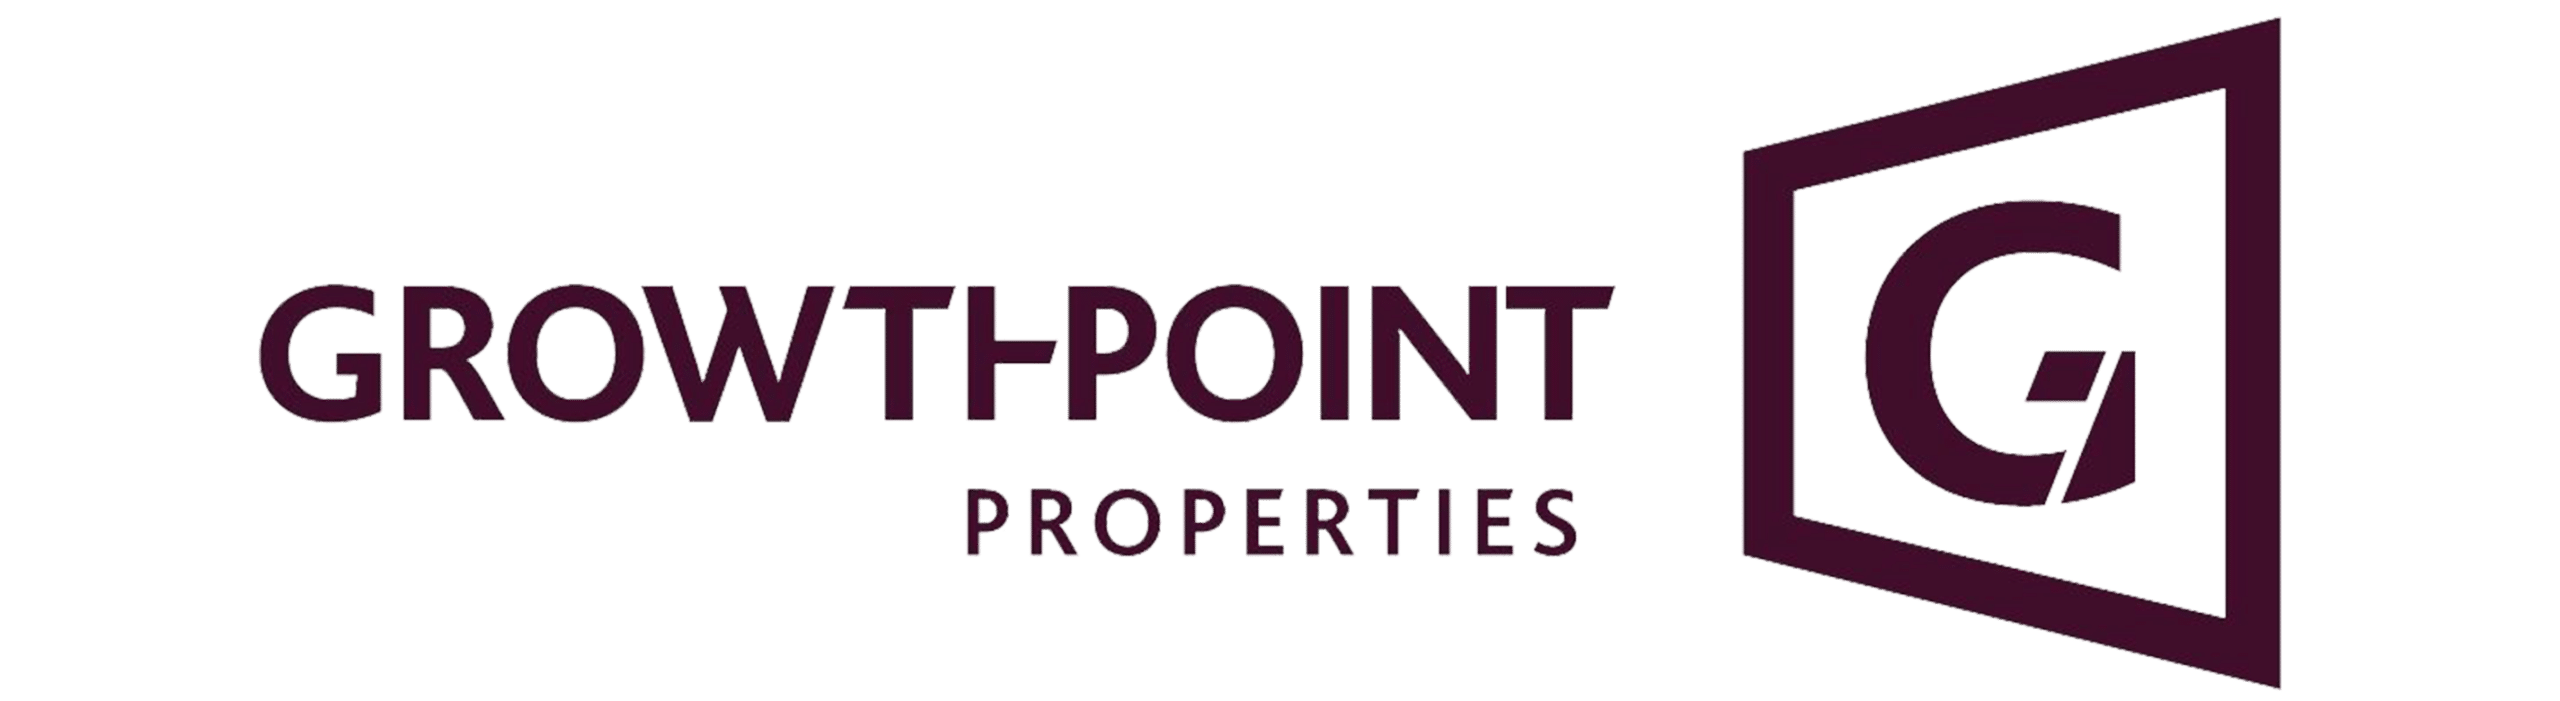 Growthpoint